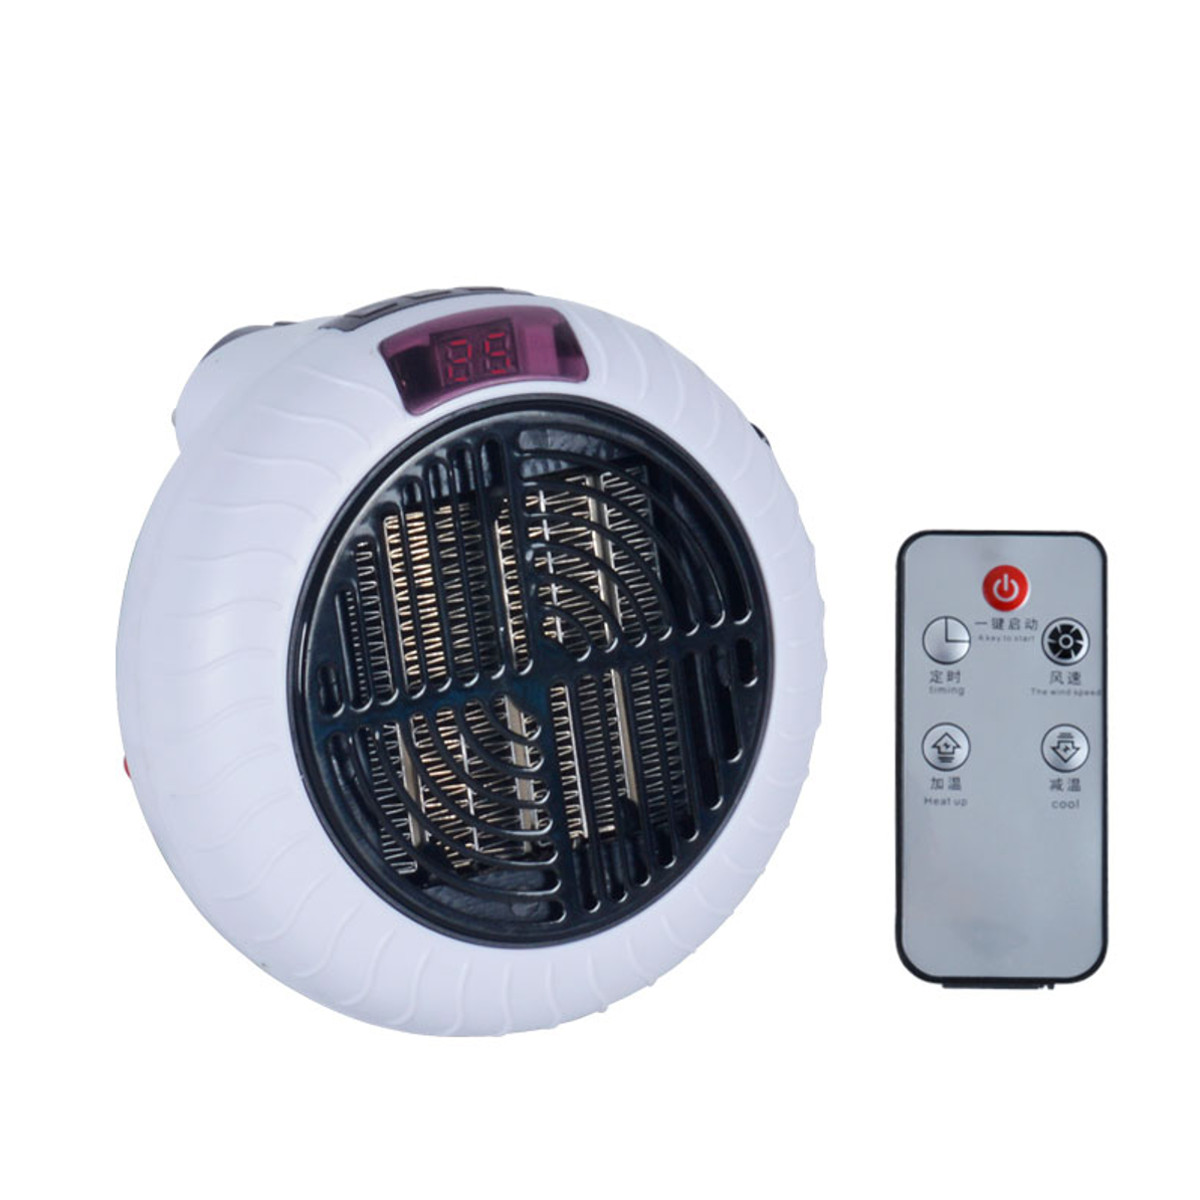 

900W Mini Electric Heater Warm Household Wall Handy Heater Office Stove Room